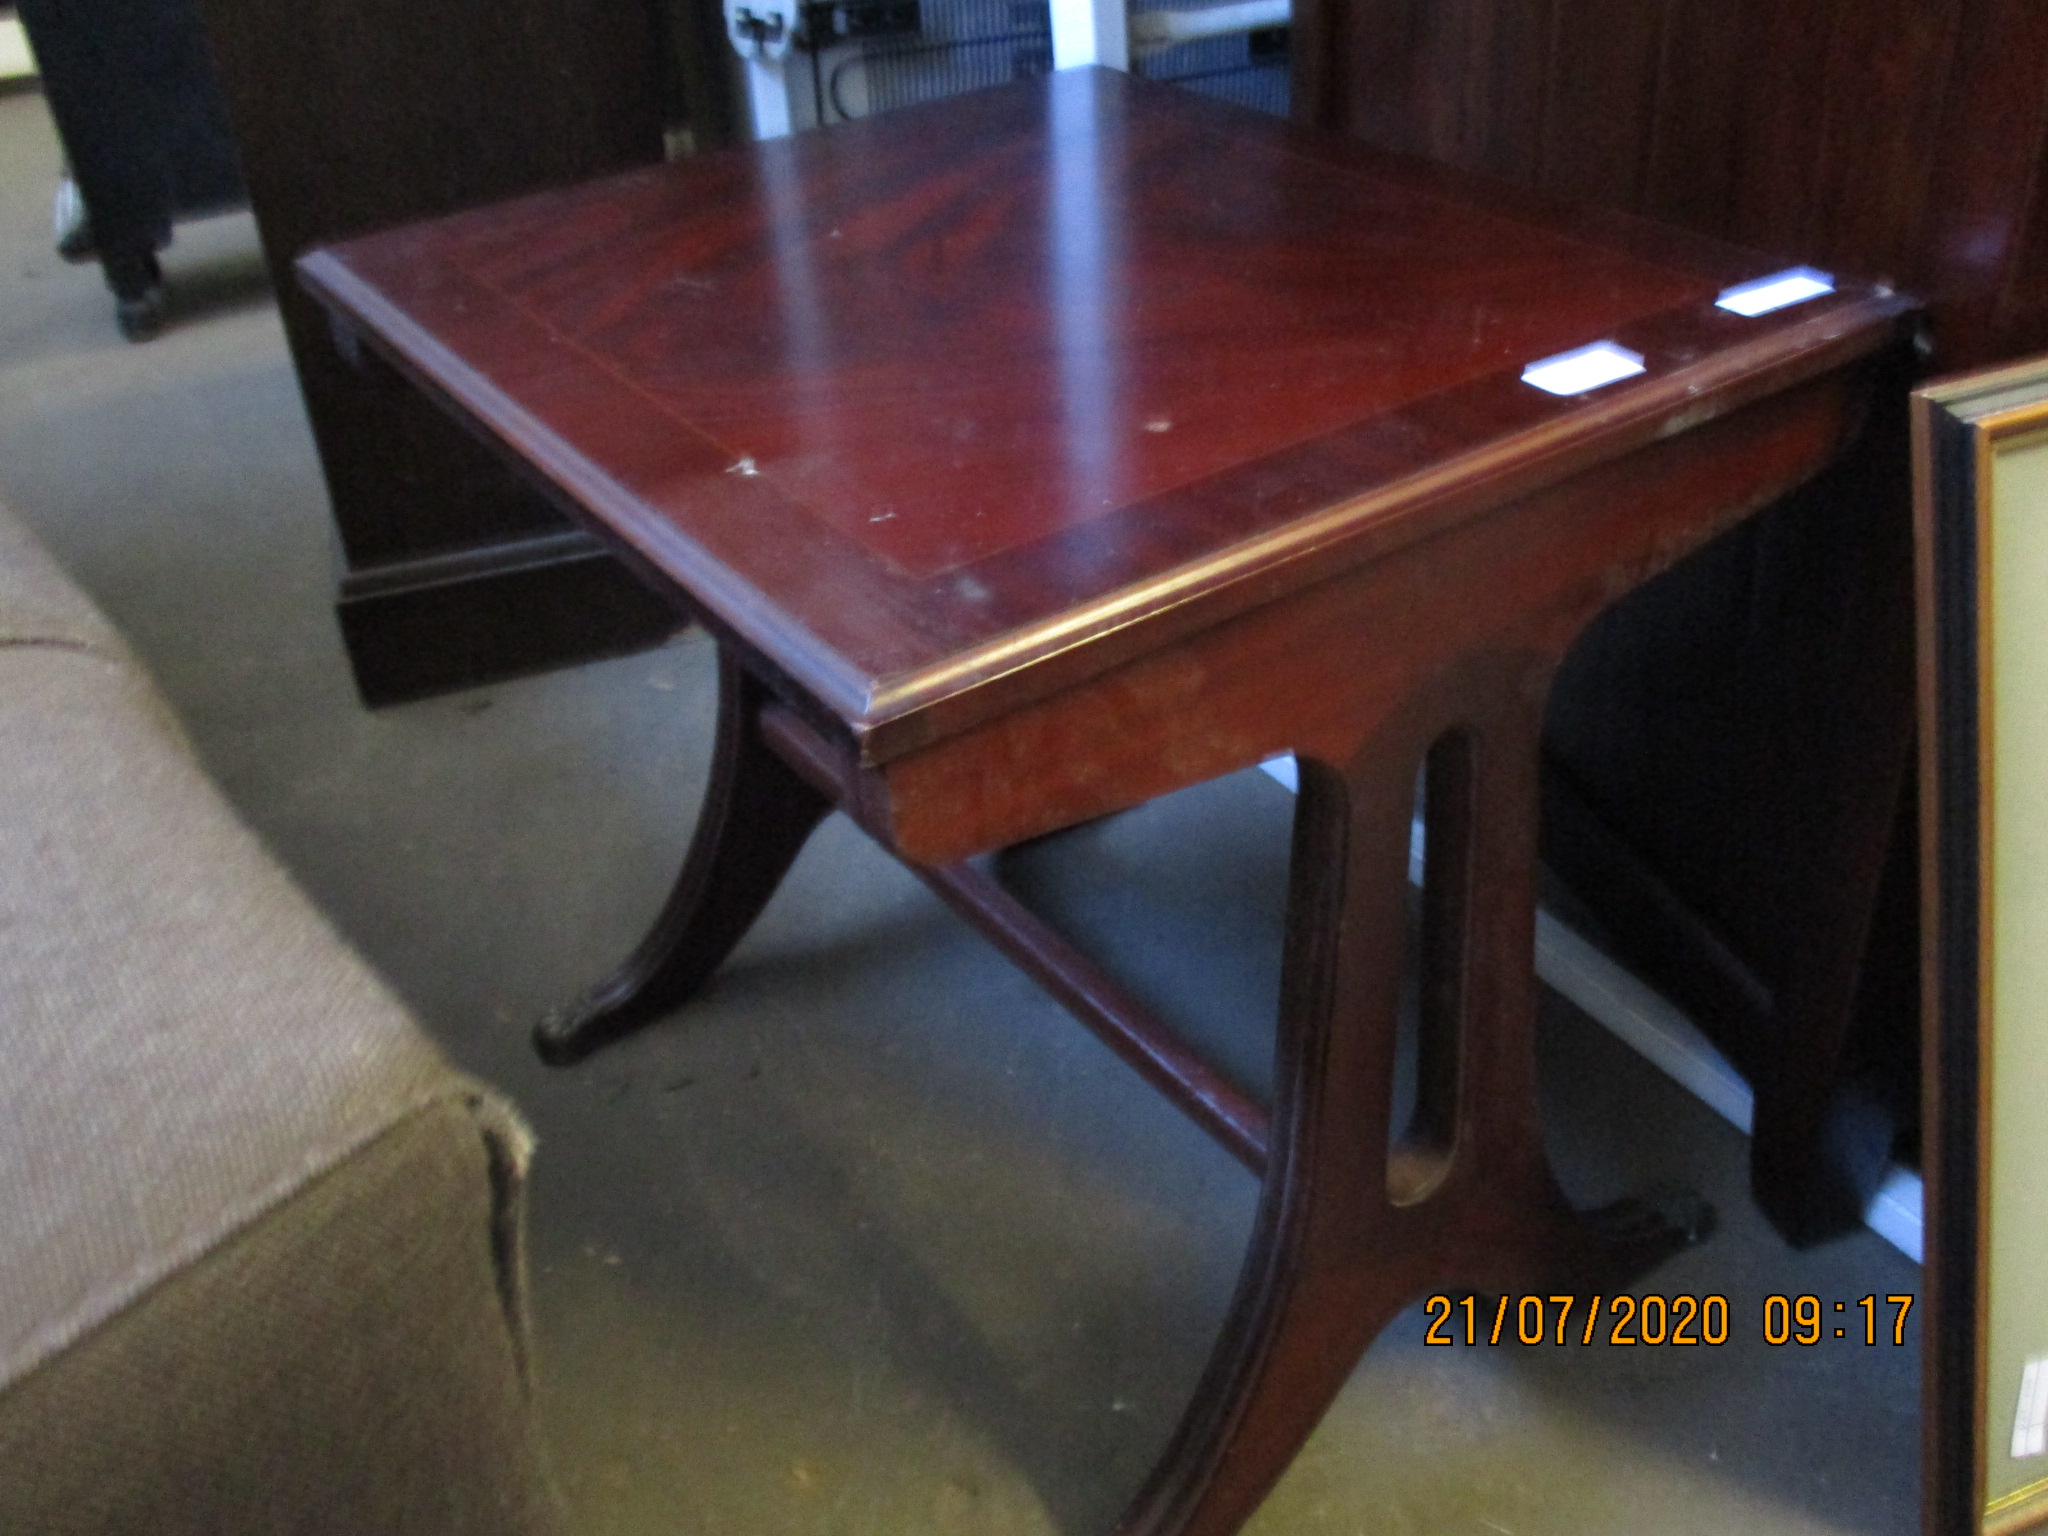 REPRODUCTION MAHOGANY INLAID OCCASIONAL TABLE